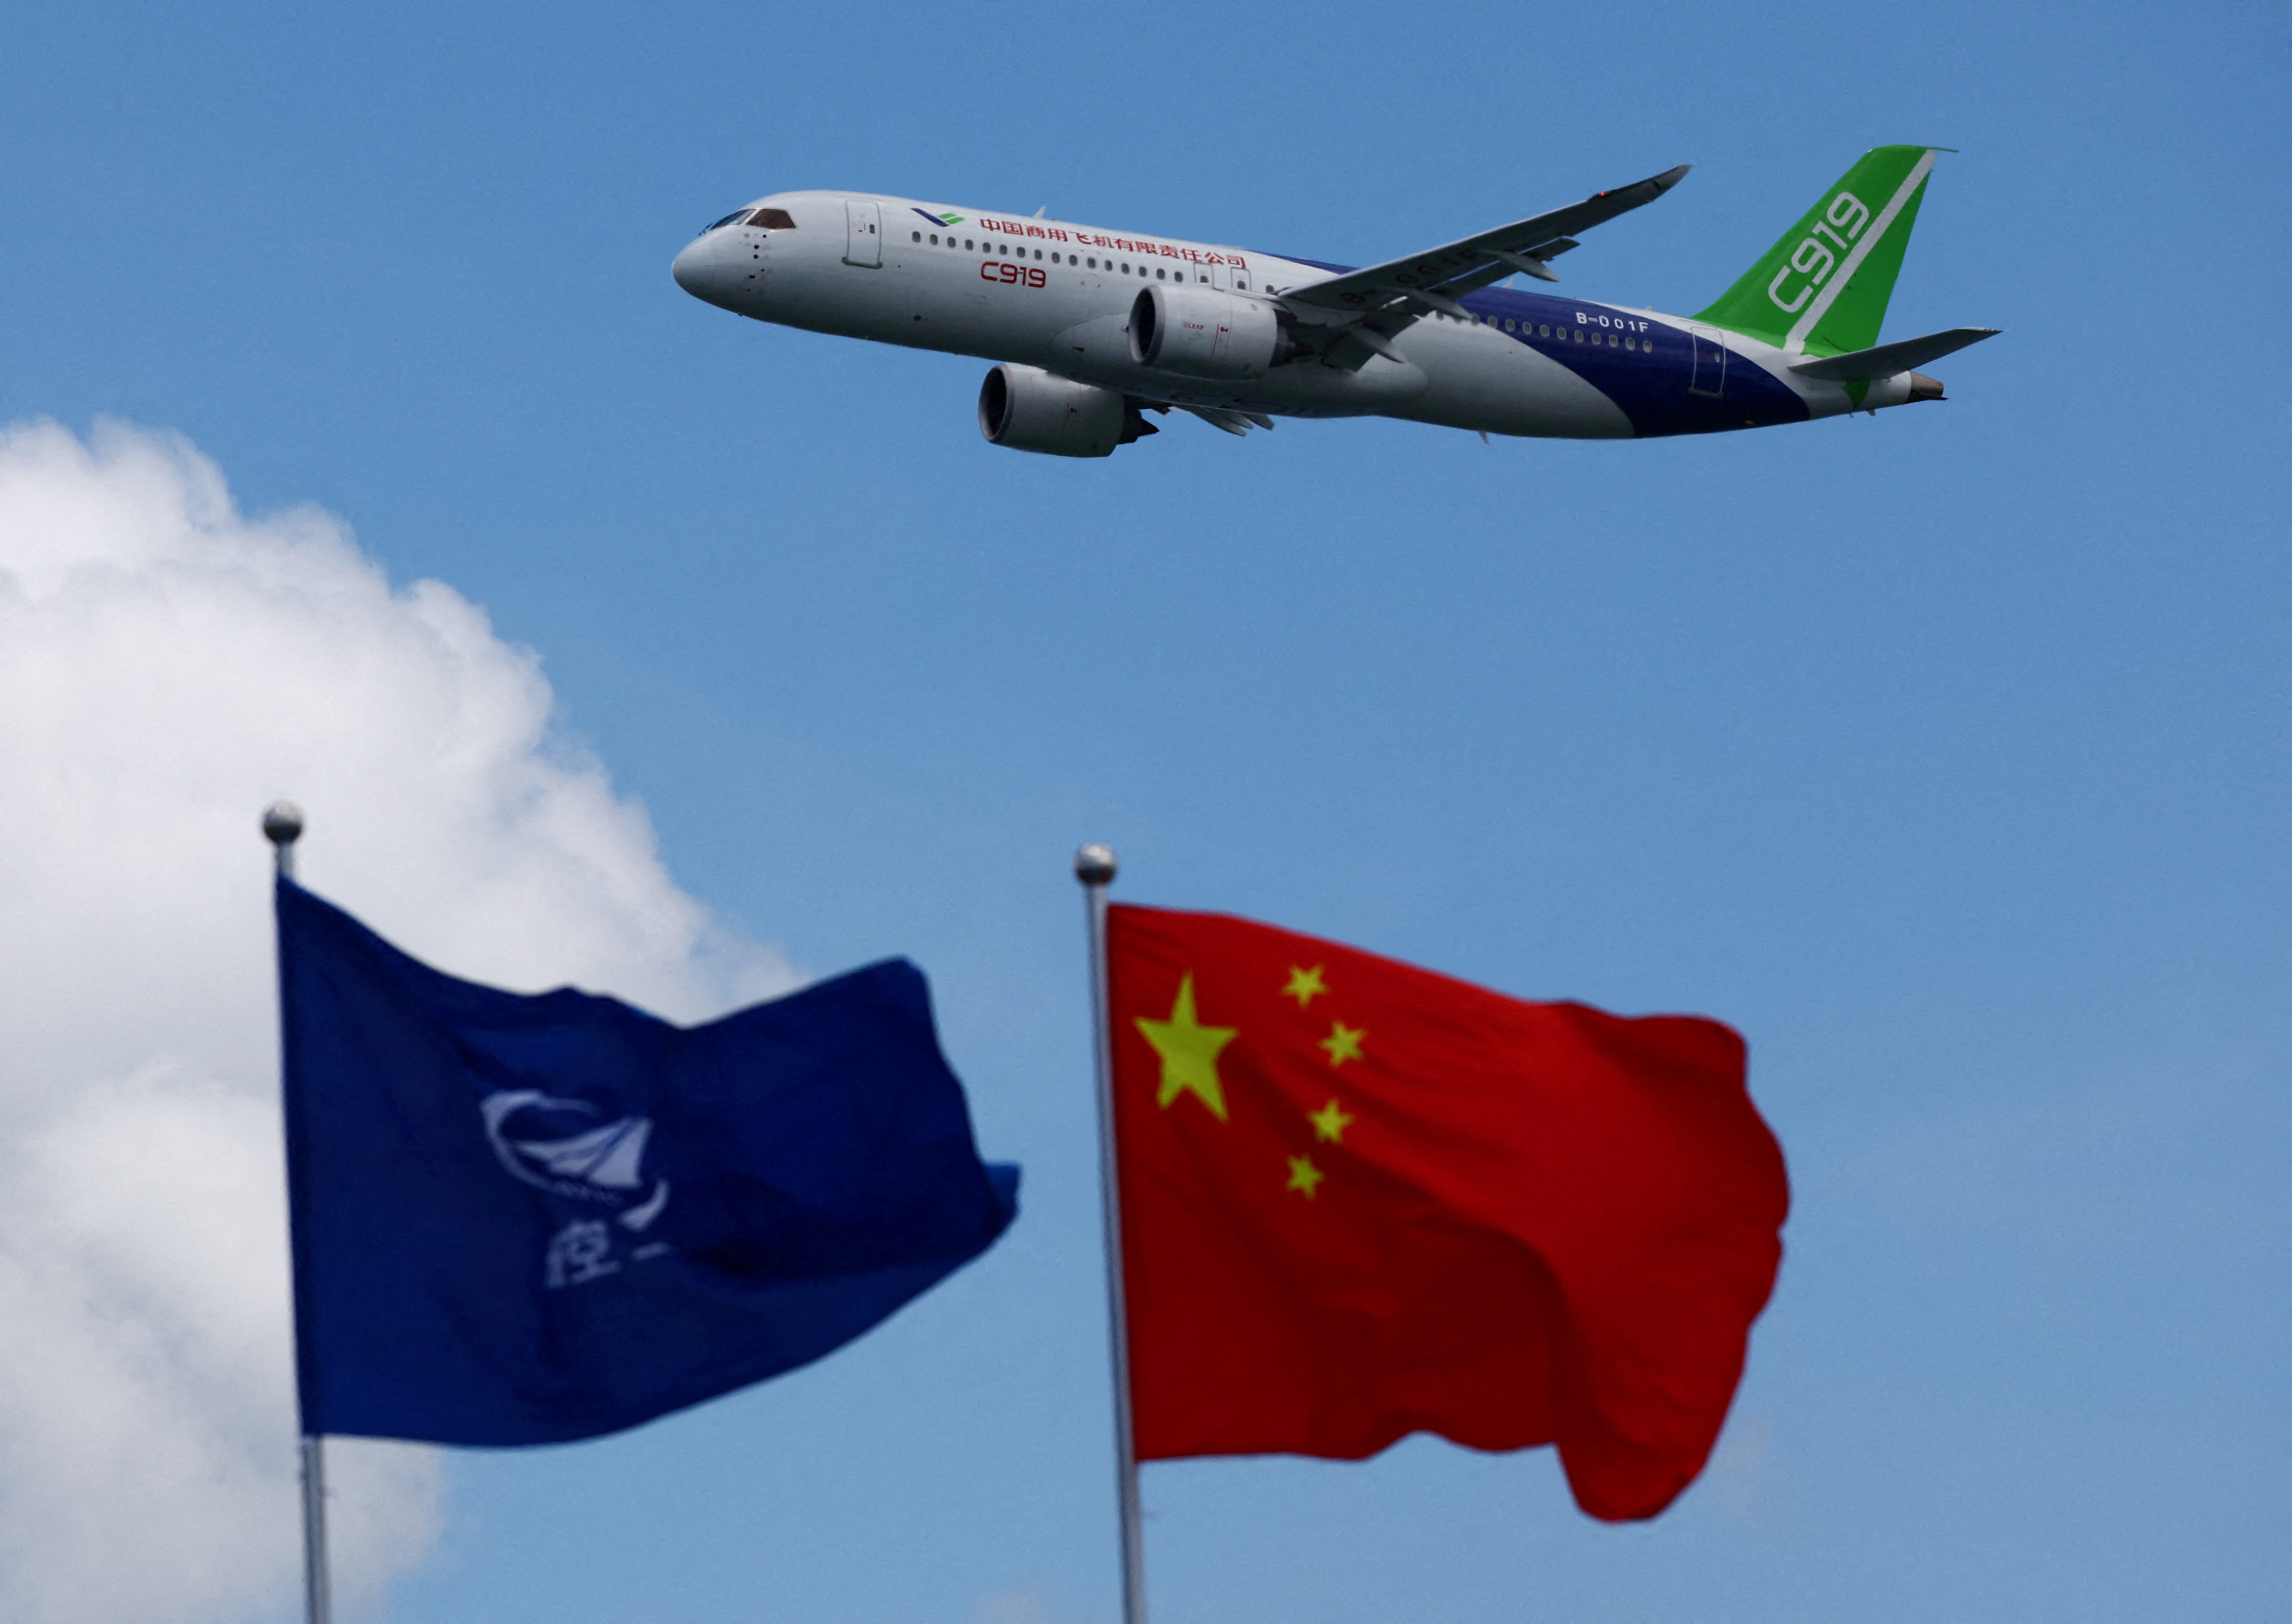 A Comac C919 flies during an aerial display at the Singapore Airshow at Changi Exhibition Centre in Singapore